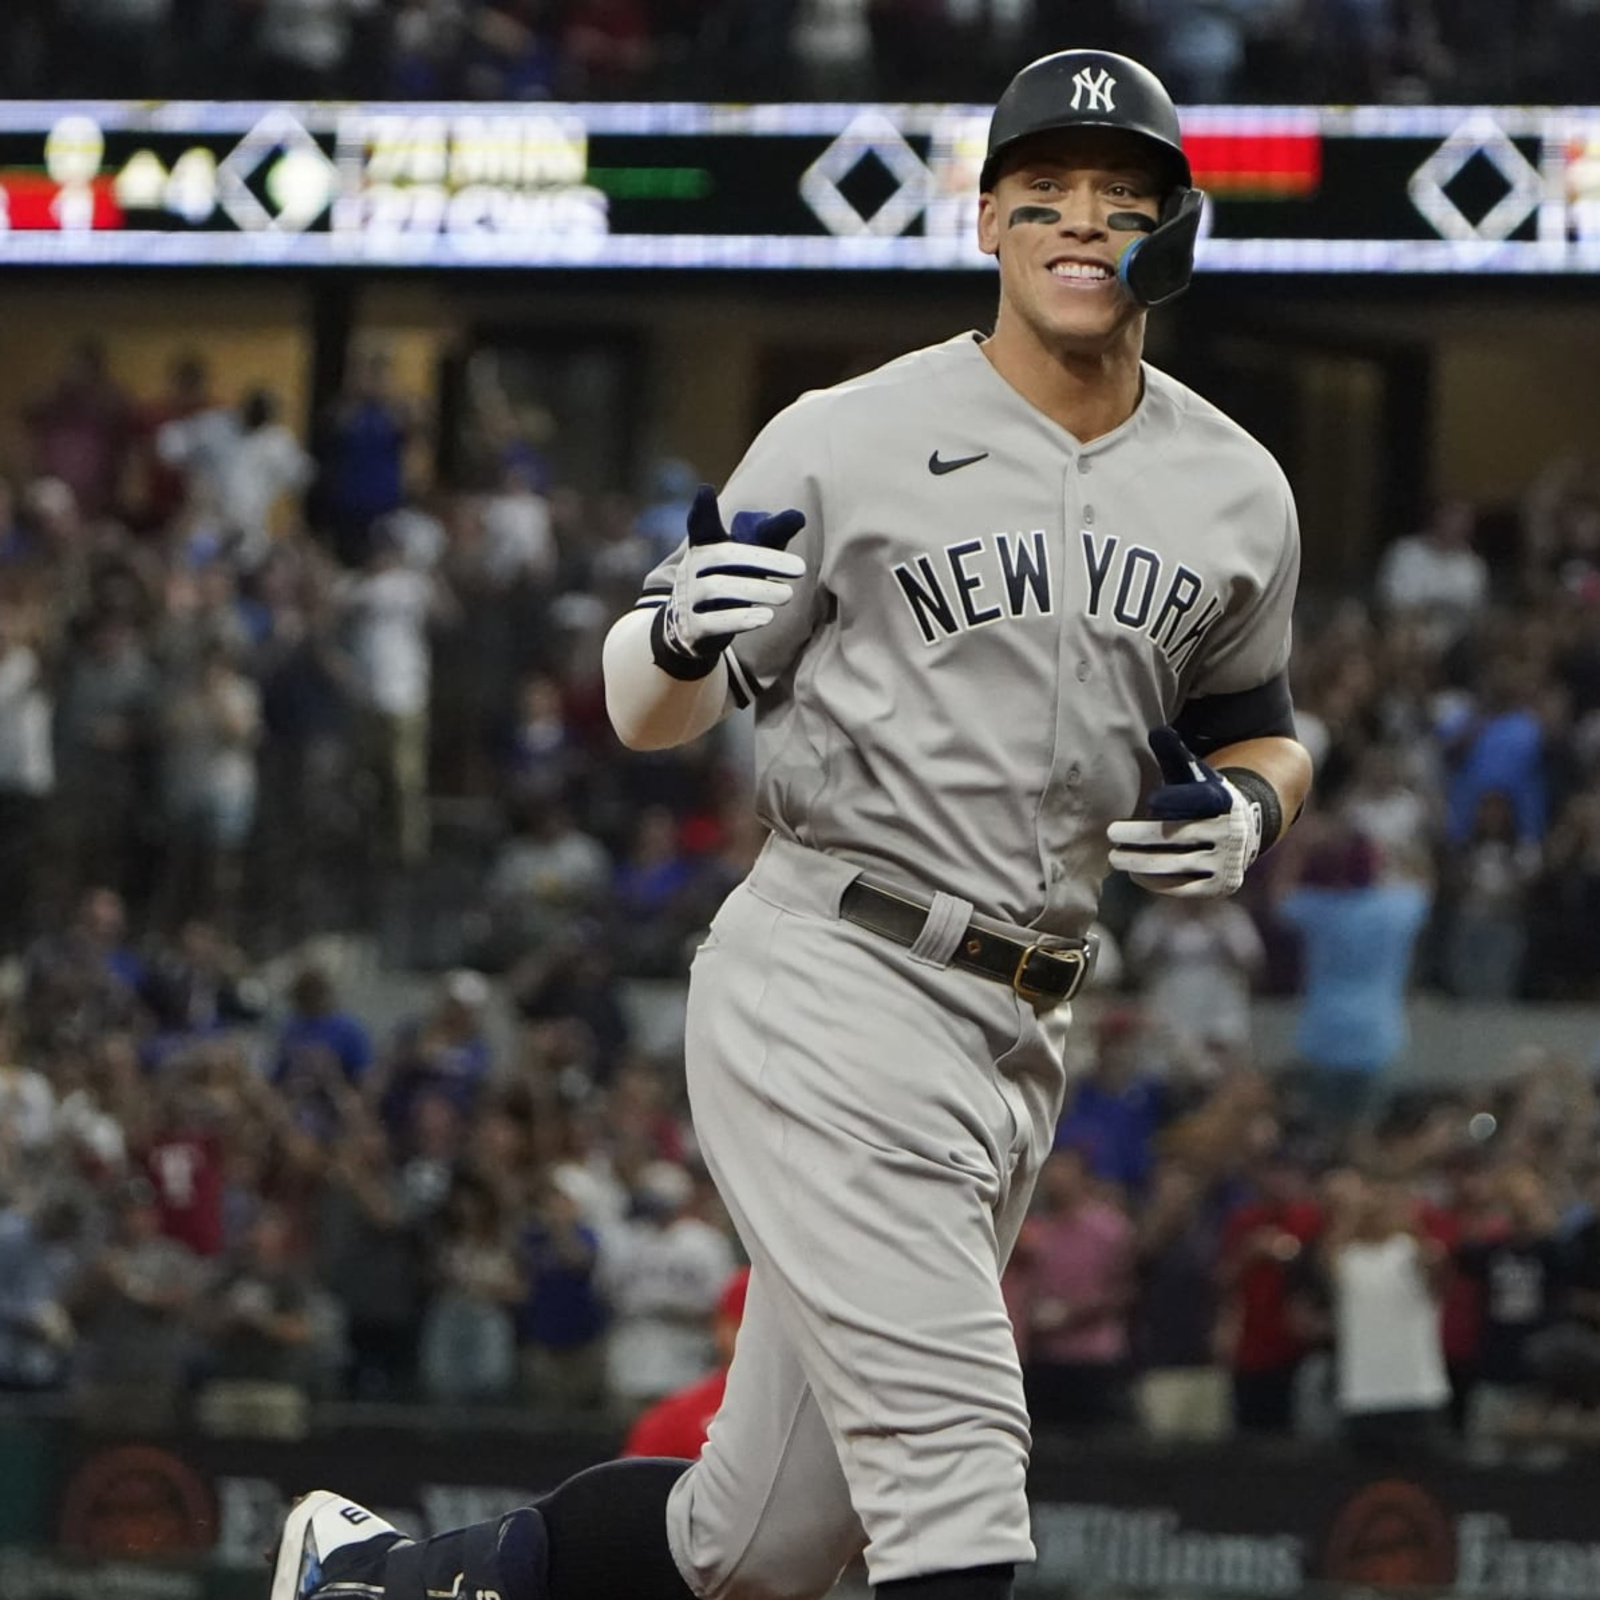 2017 Aaron Judge Topps Now Rookie Card Home Run Derby Champion 